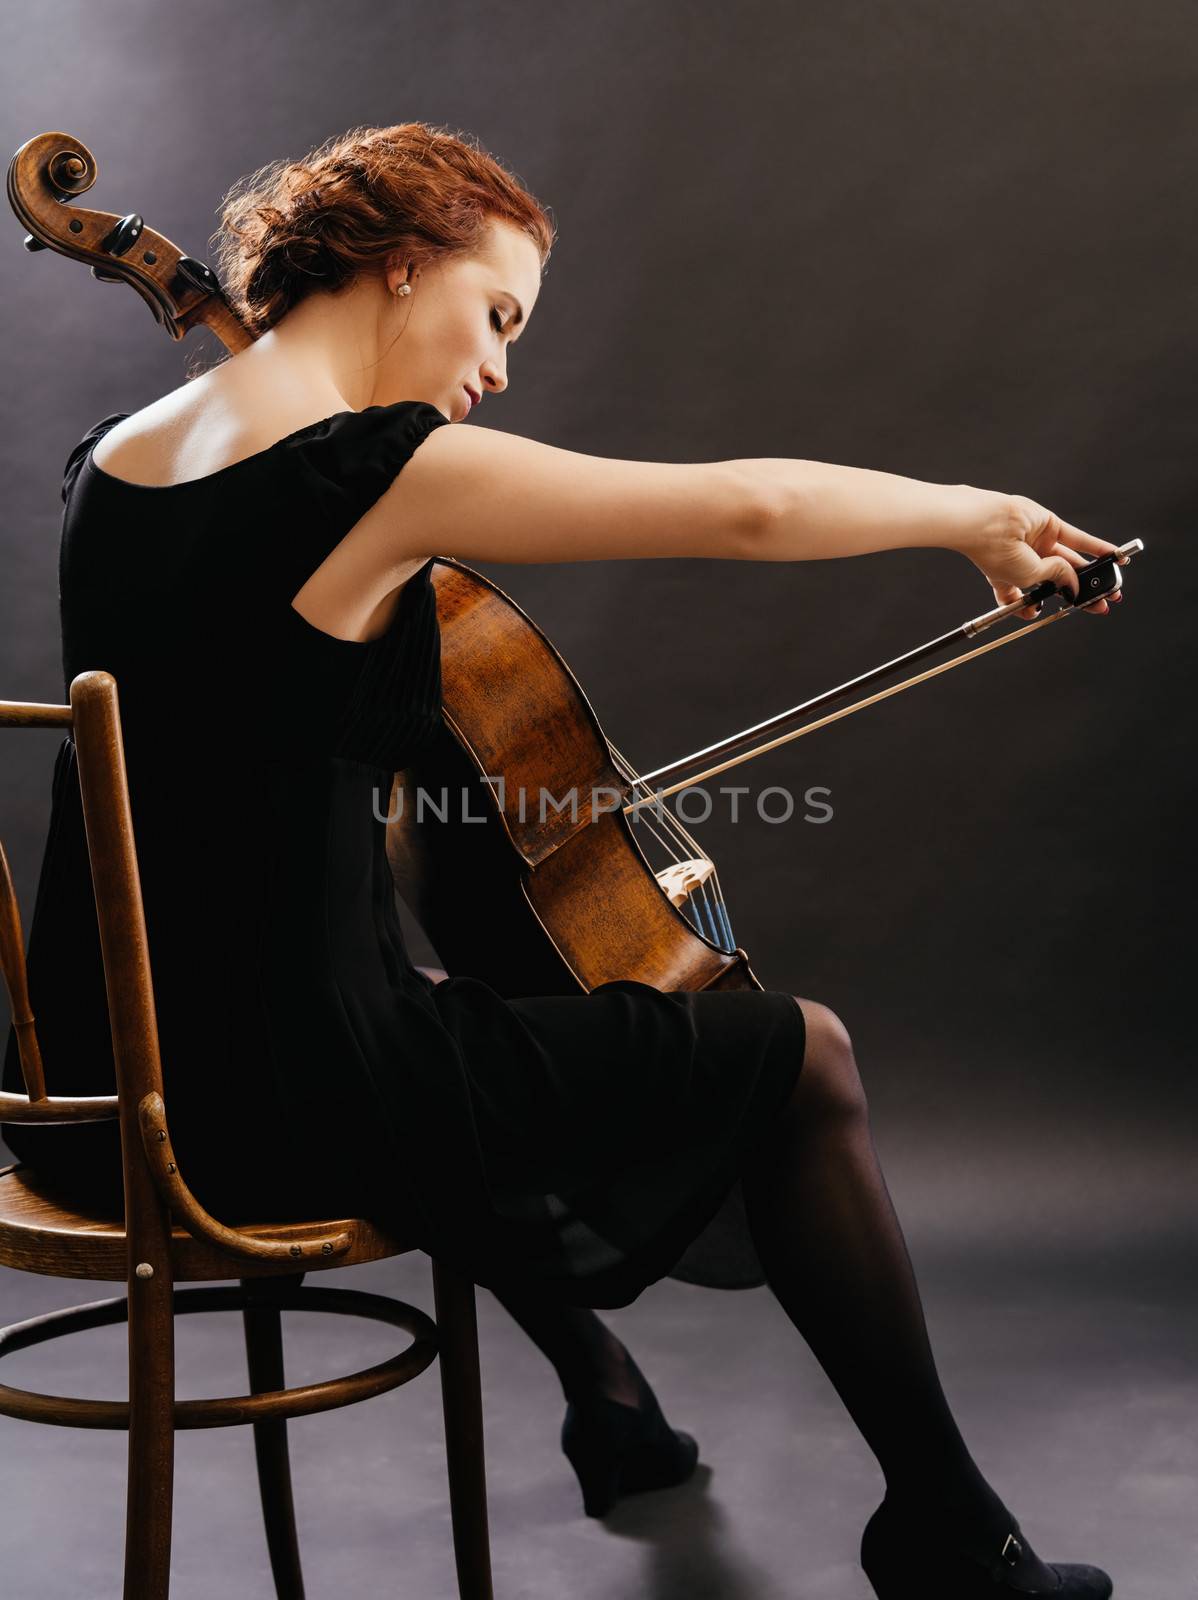 Cello player enjoying her music by sumners